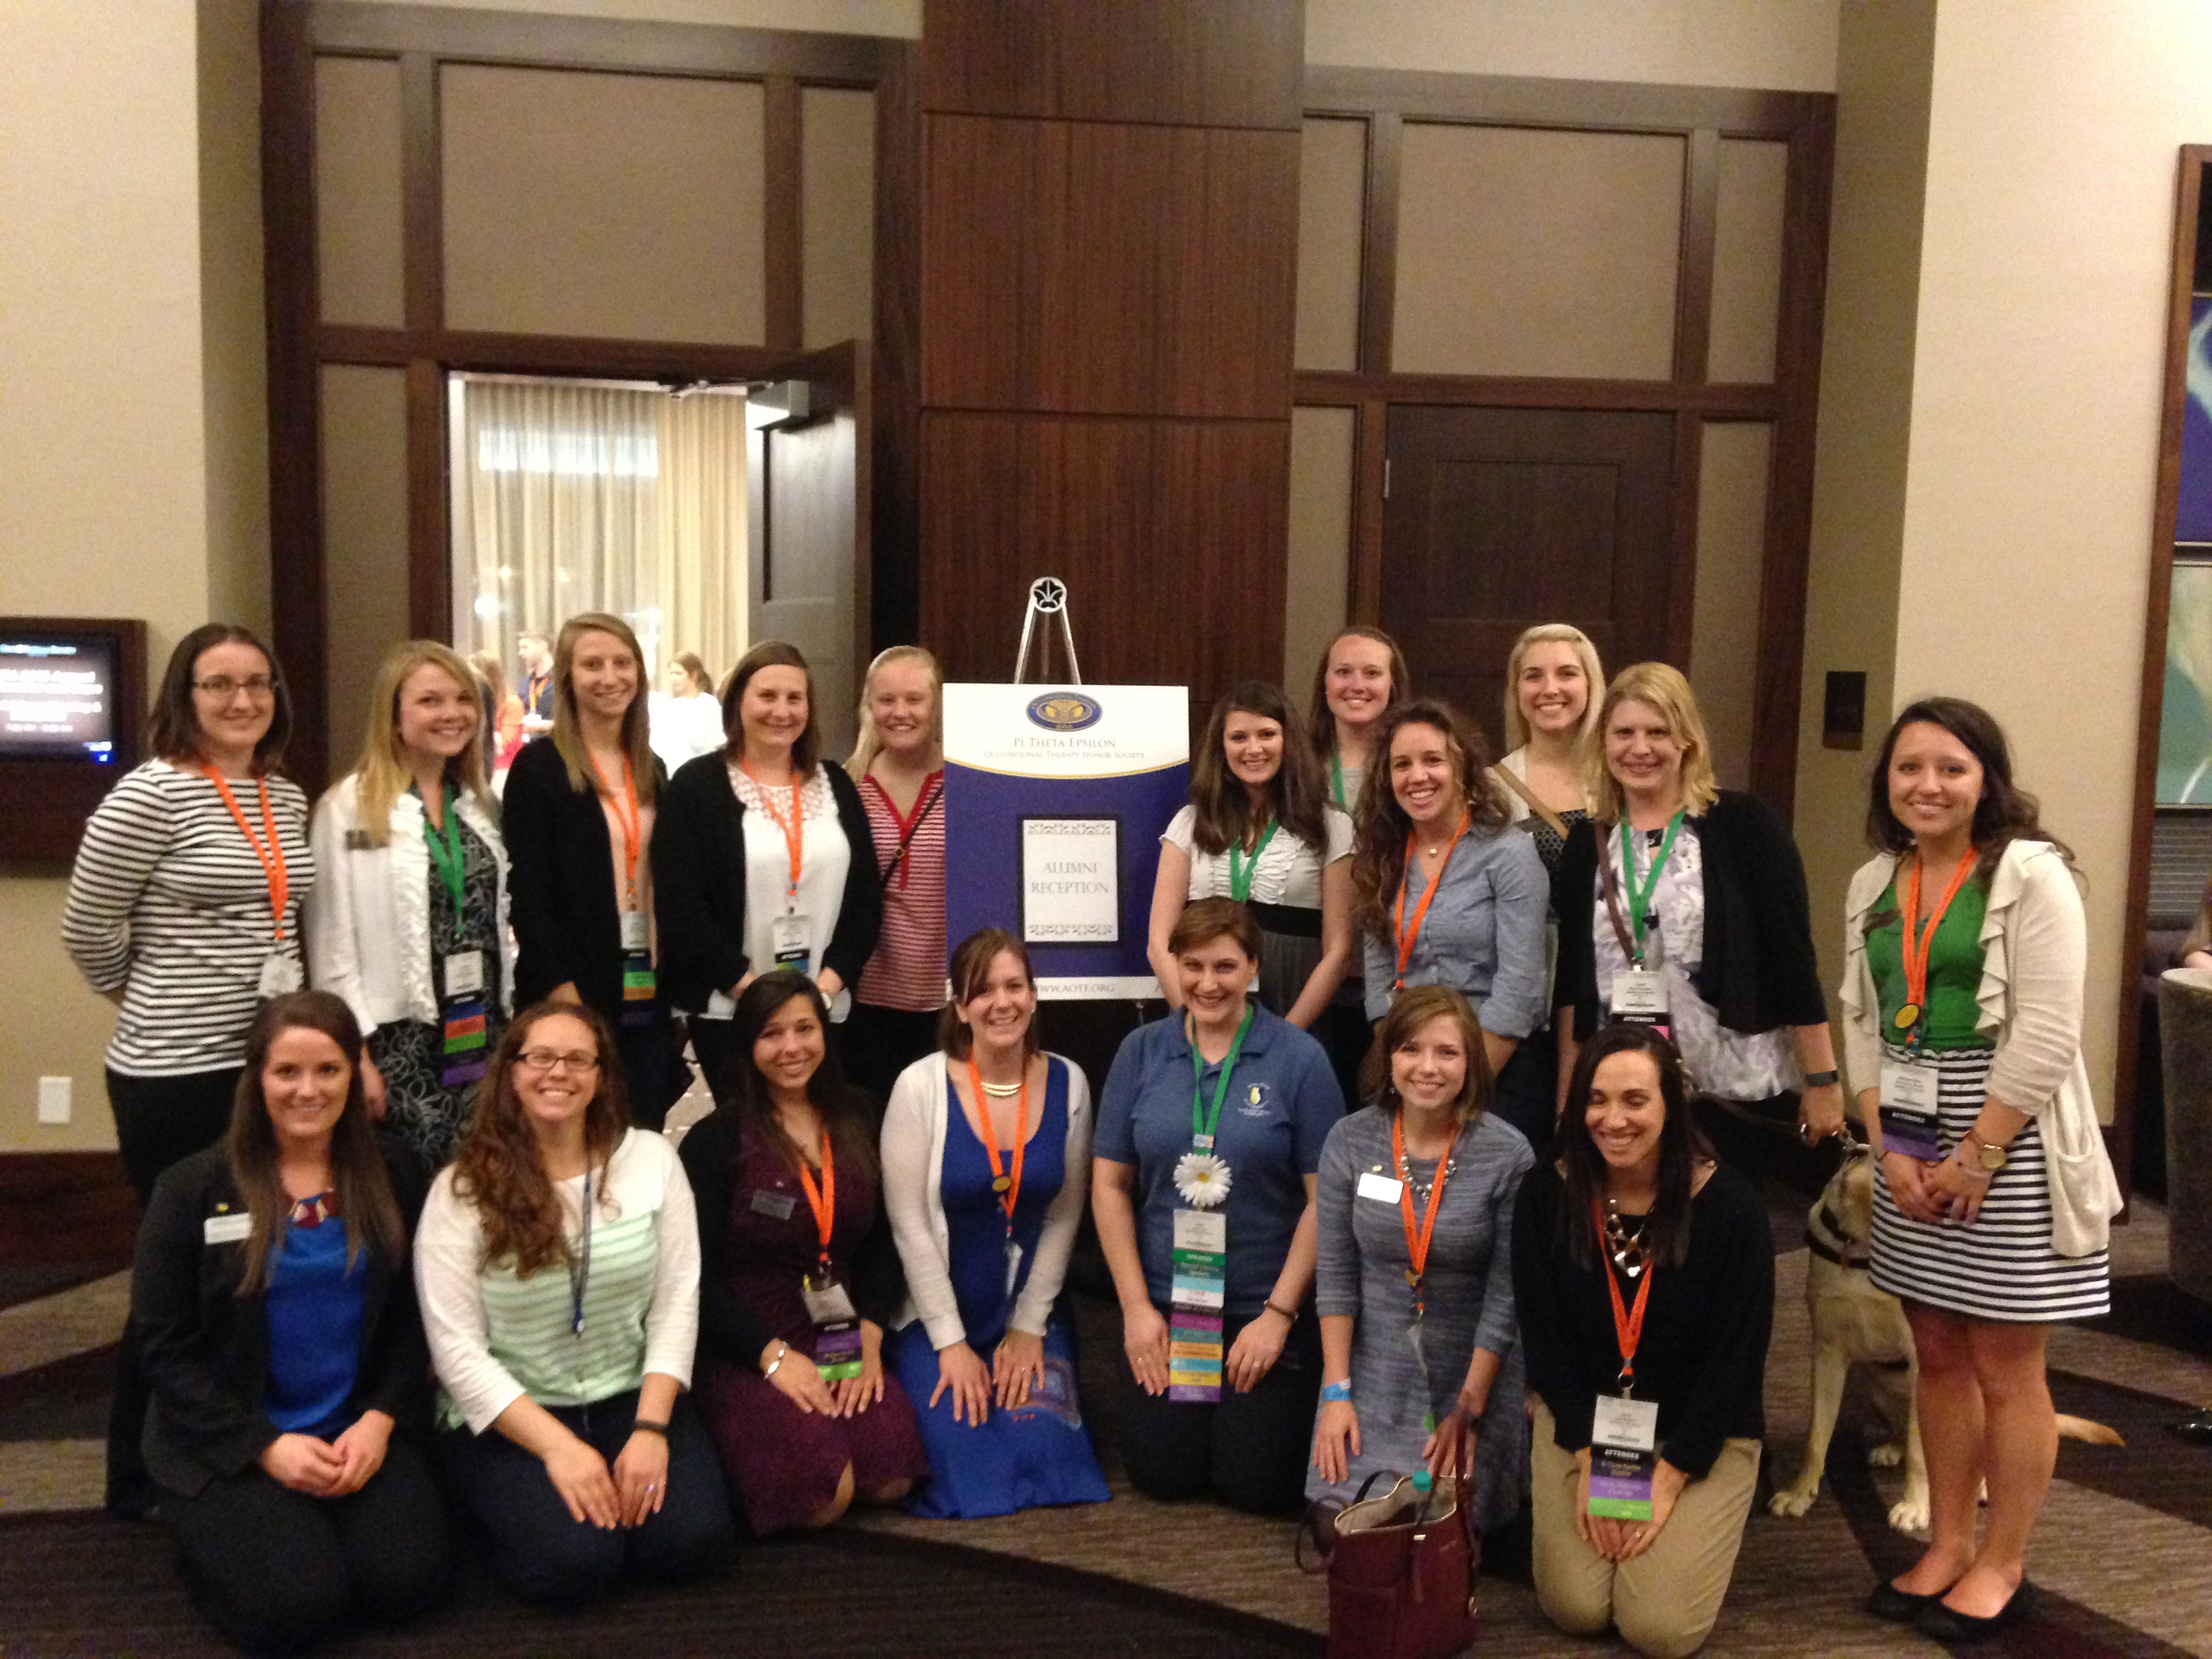 PTE students from Spalding University's Beta Rho chapter at the 2015 PTE Alumni Reception during the AOTA Annual Conference